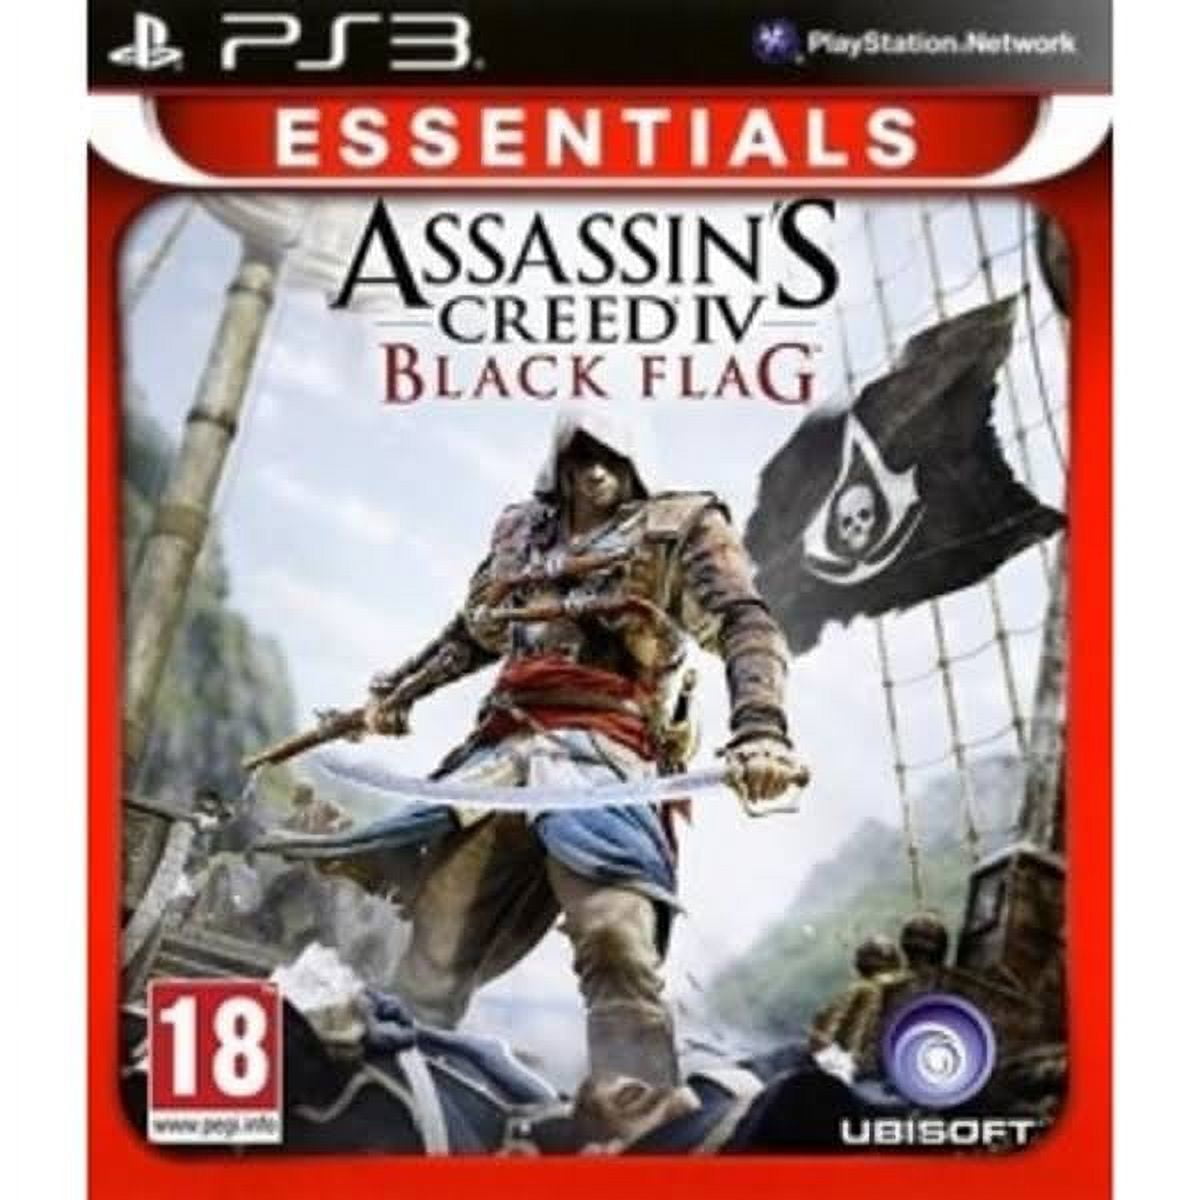 Video Games PS3 Assasins Creed - video gaming - by owner